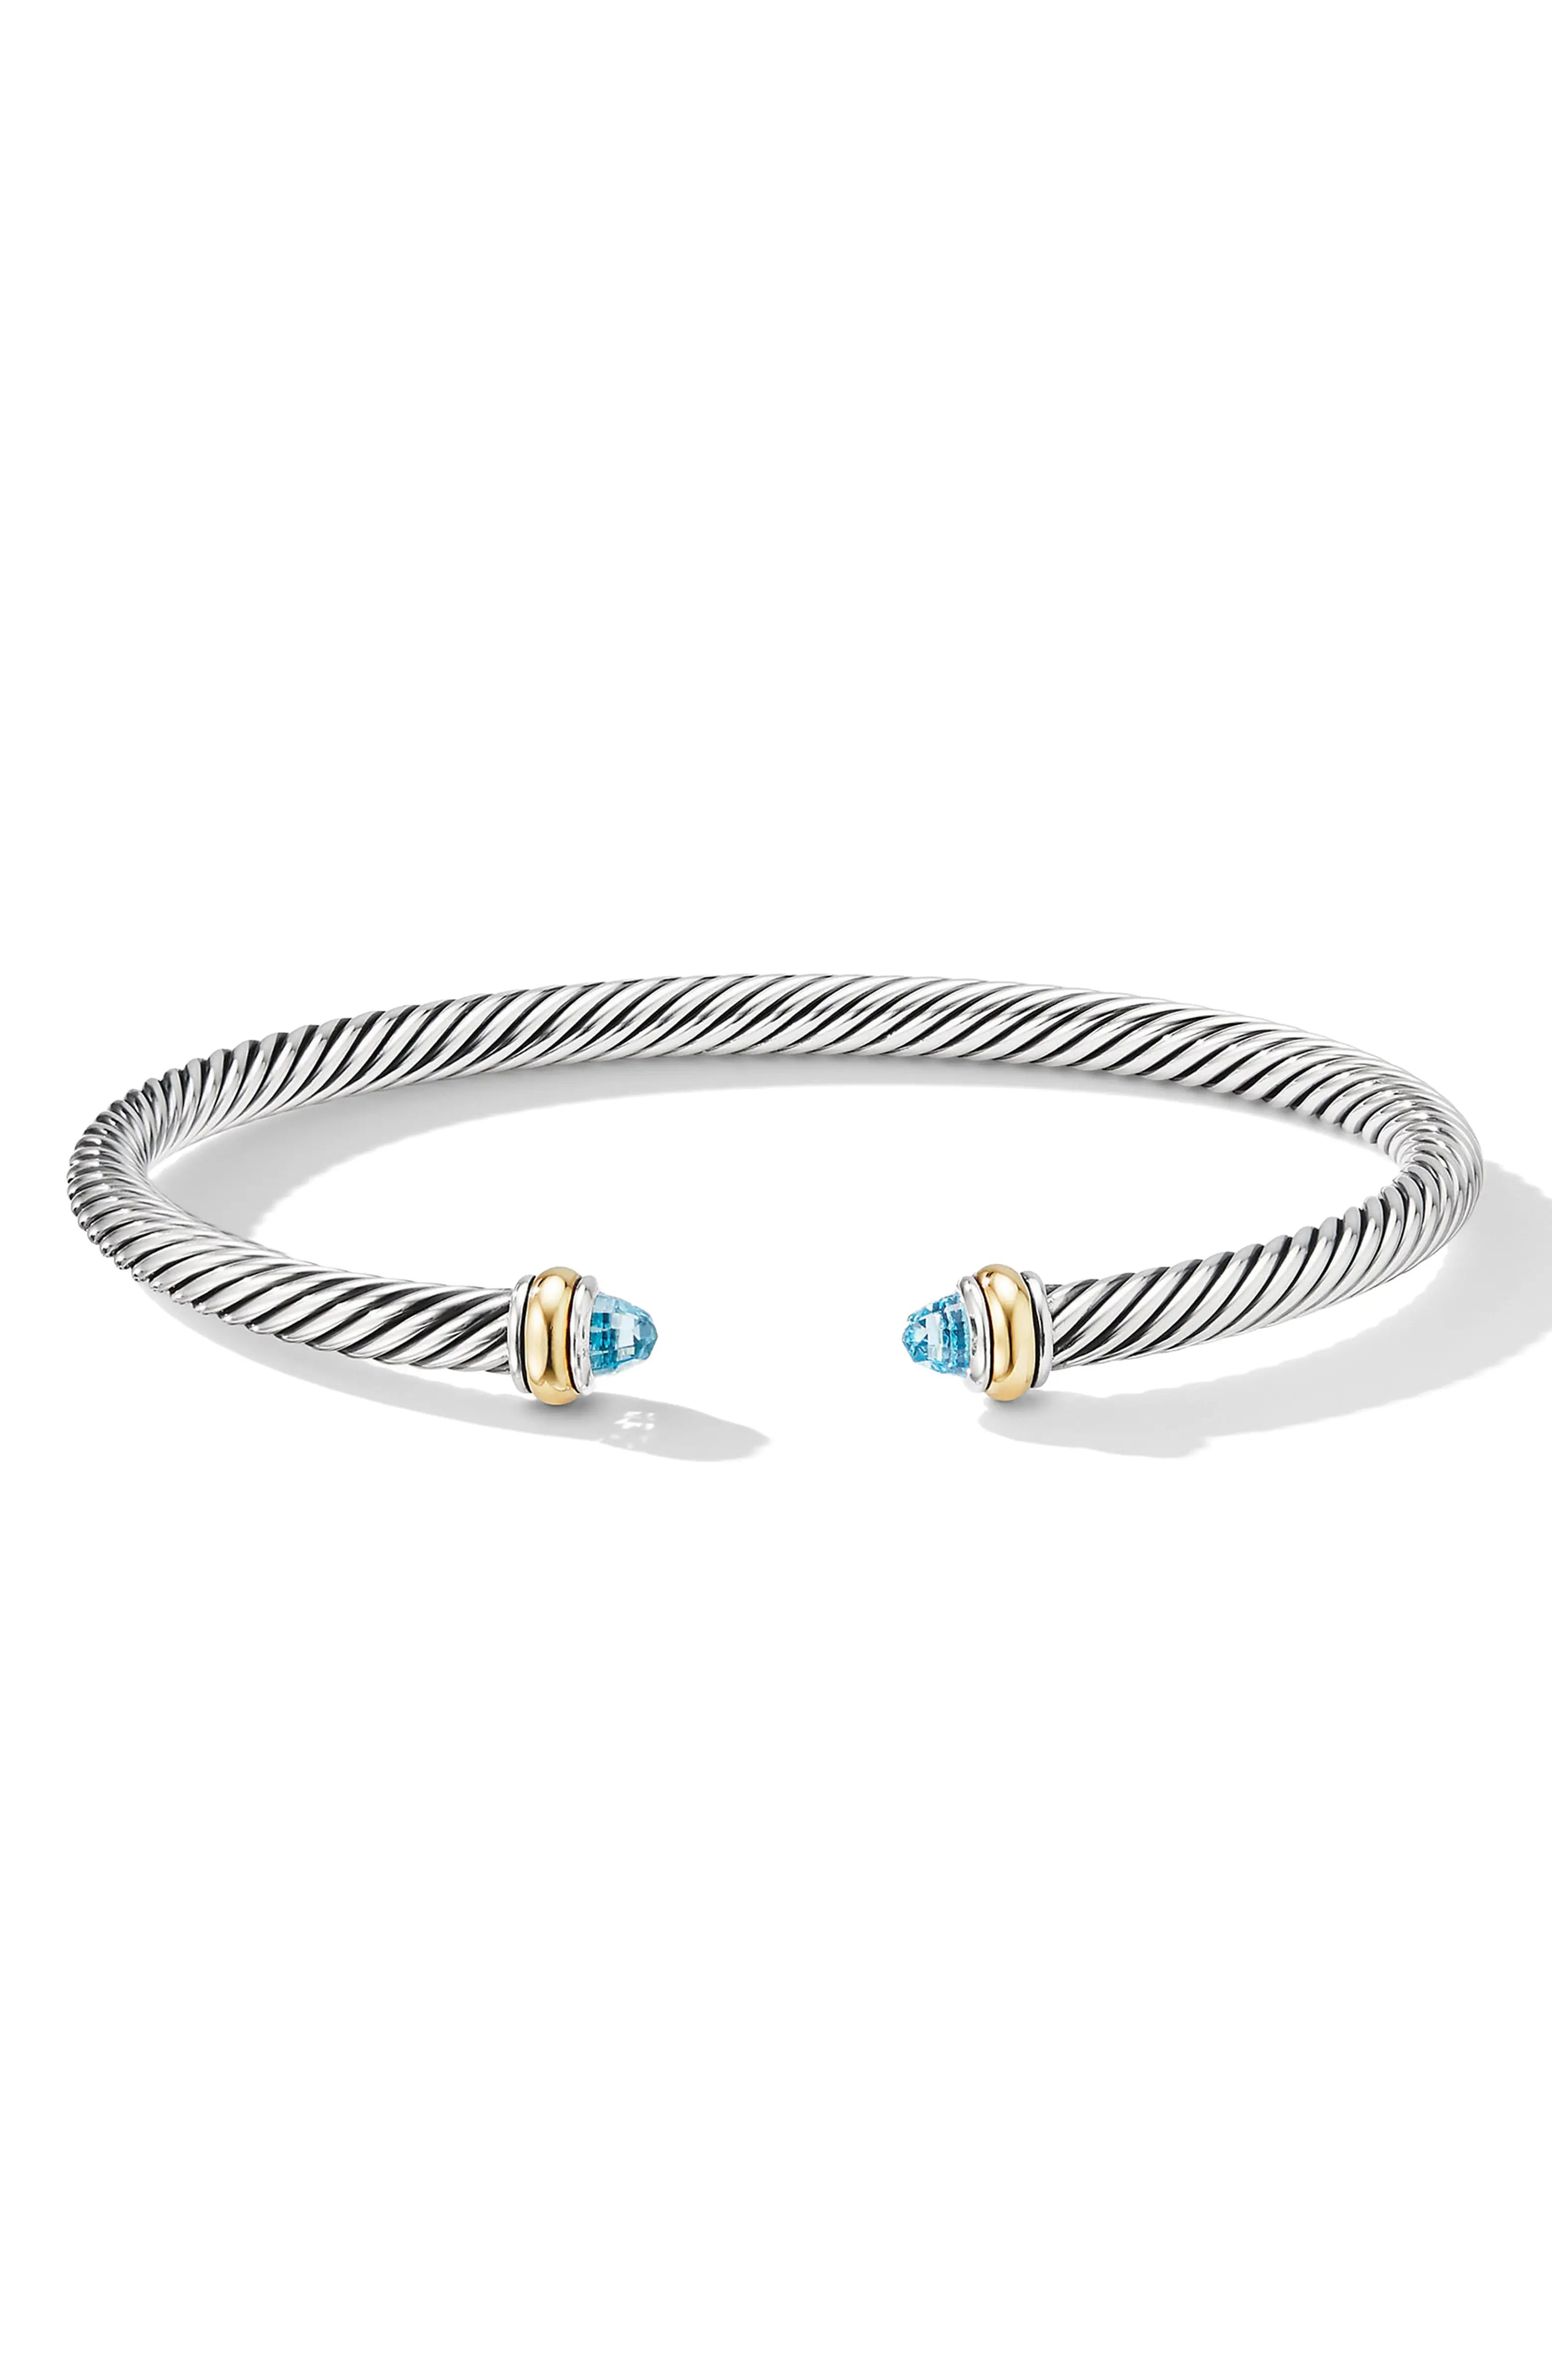 David Yurman 4mm Cable Classic Bracelet with 18K Gold & Semiprecious Stones | Nordstrom | Nordstrom